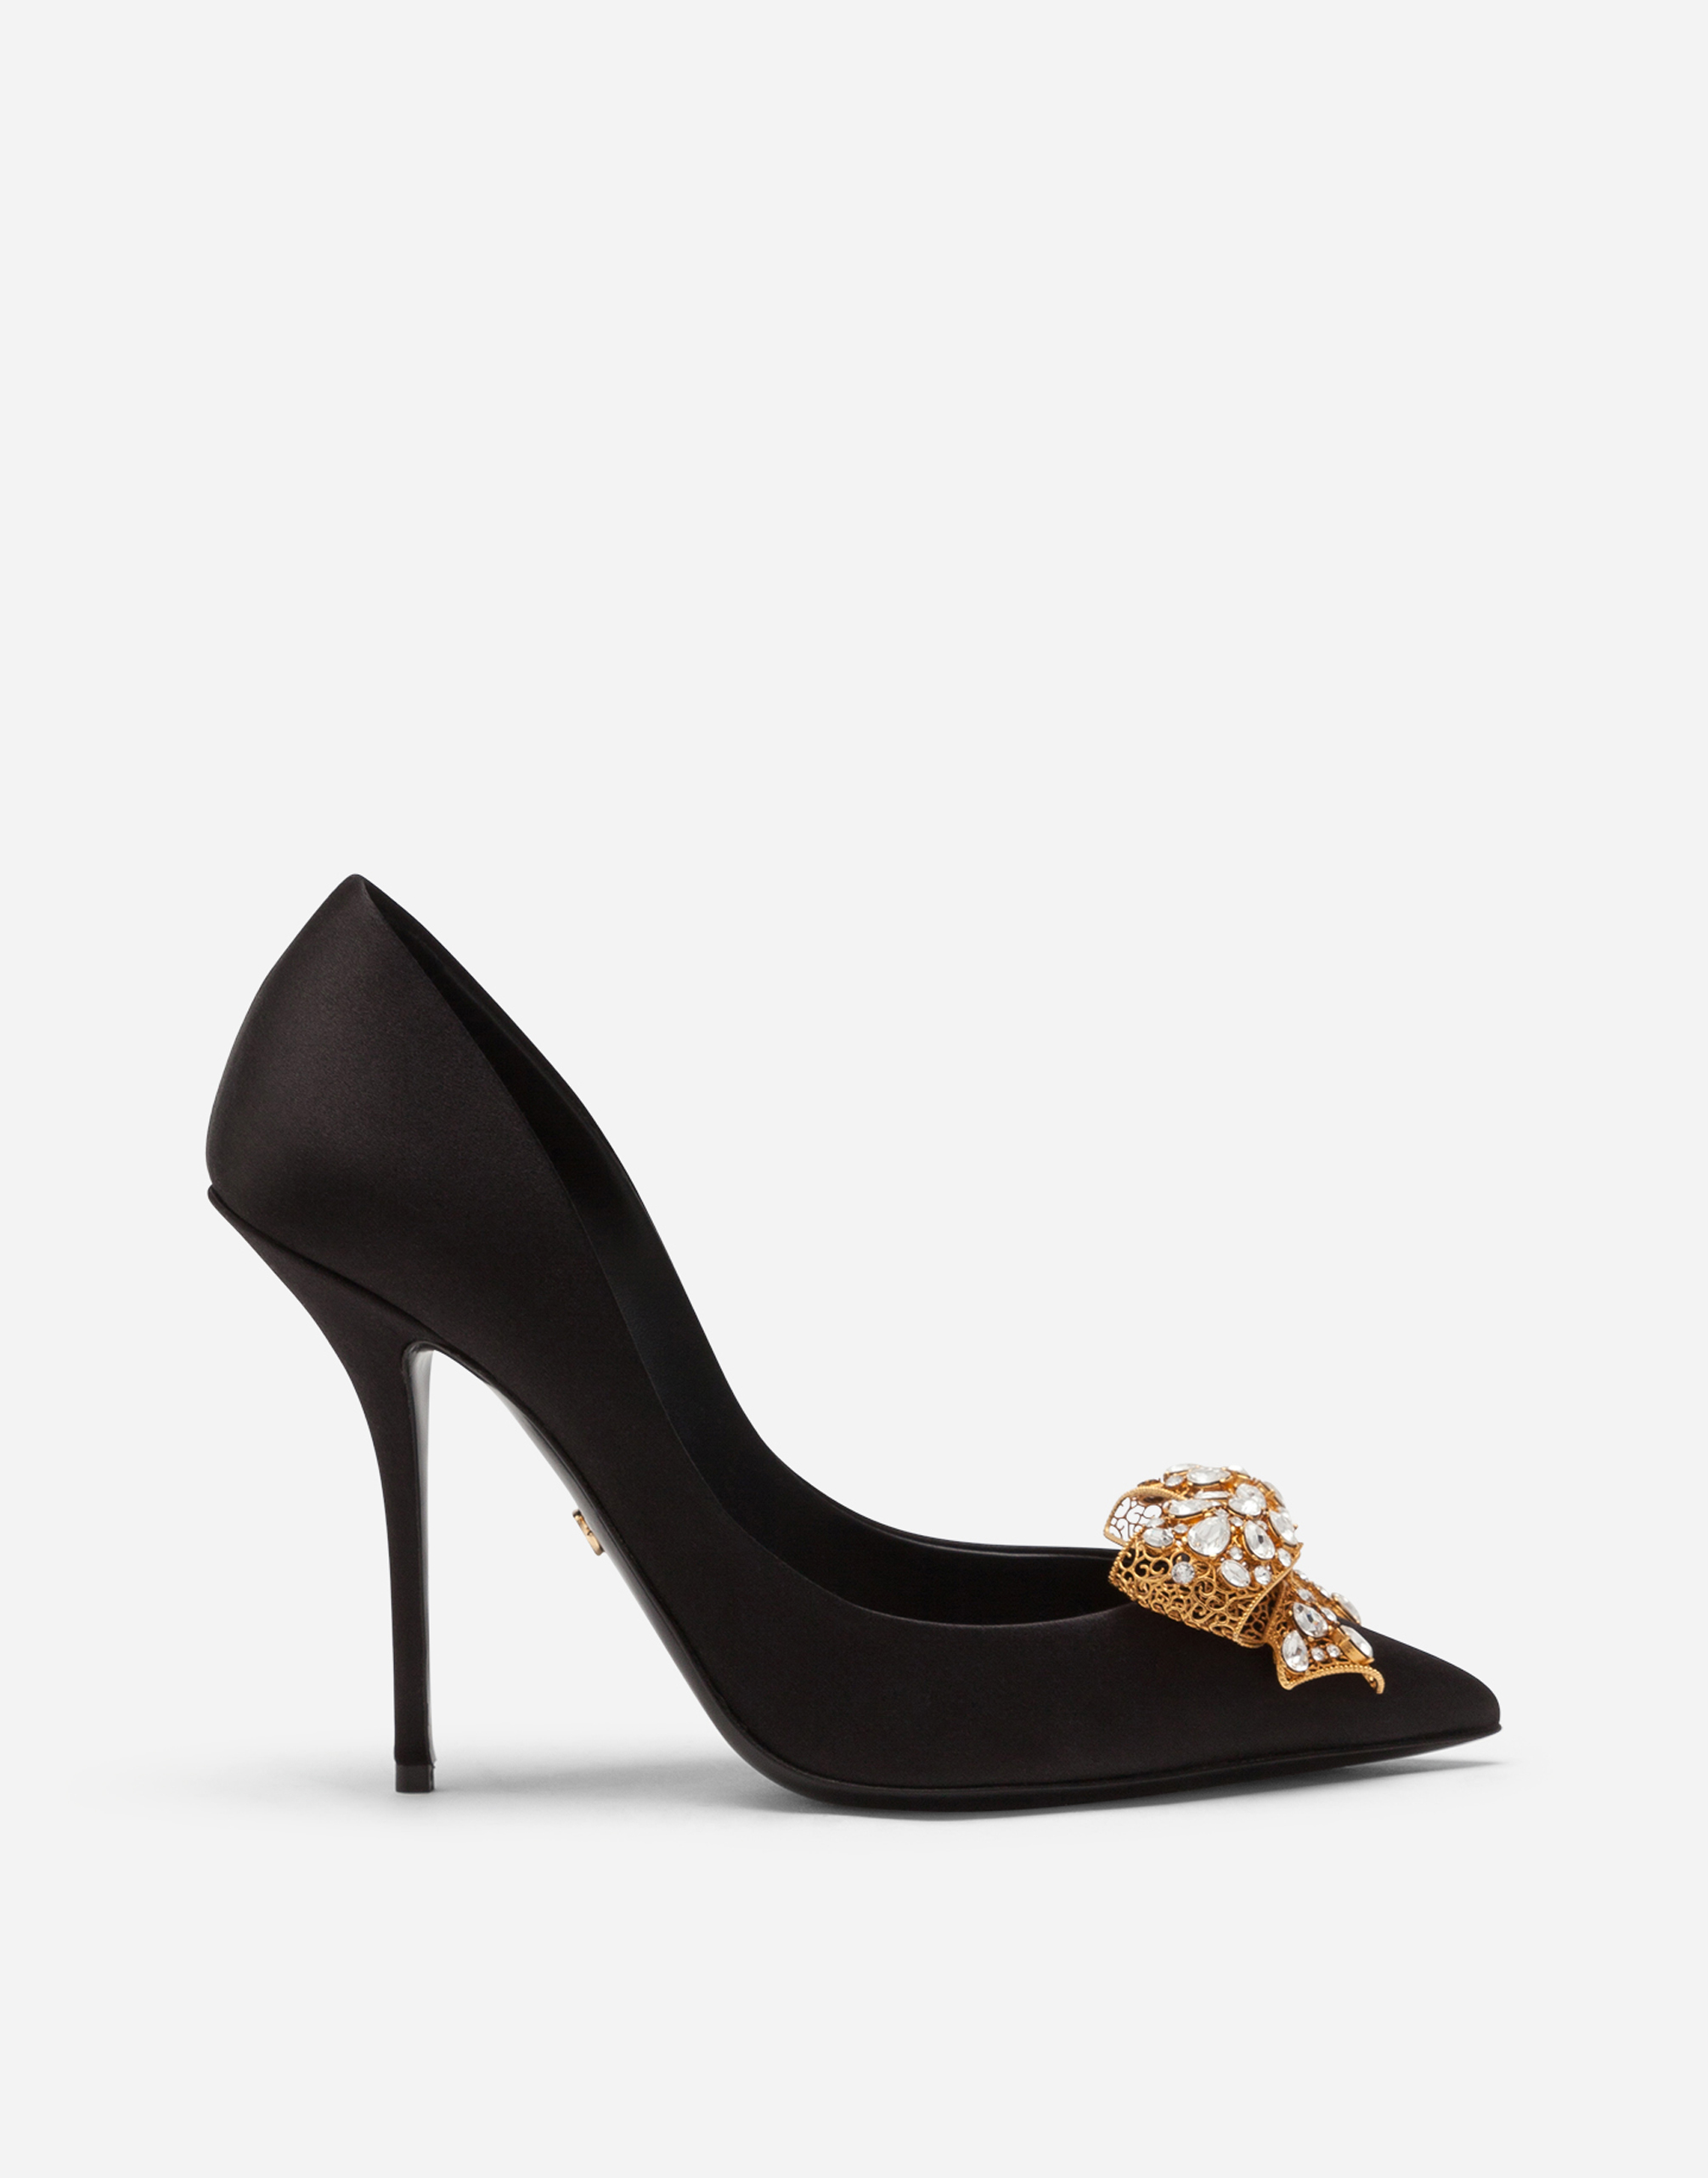 Satin pumps with bejeweled embellishment in Black